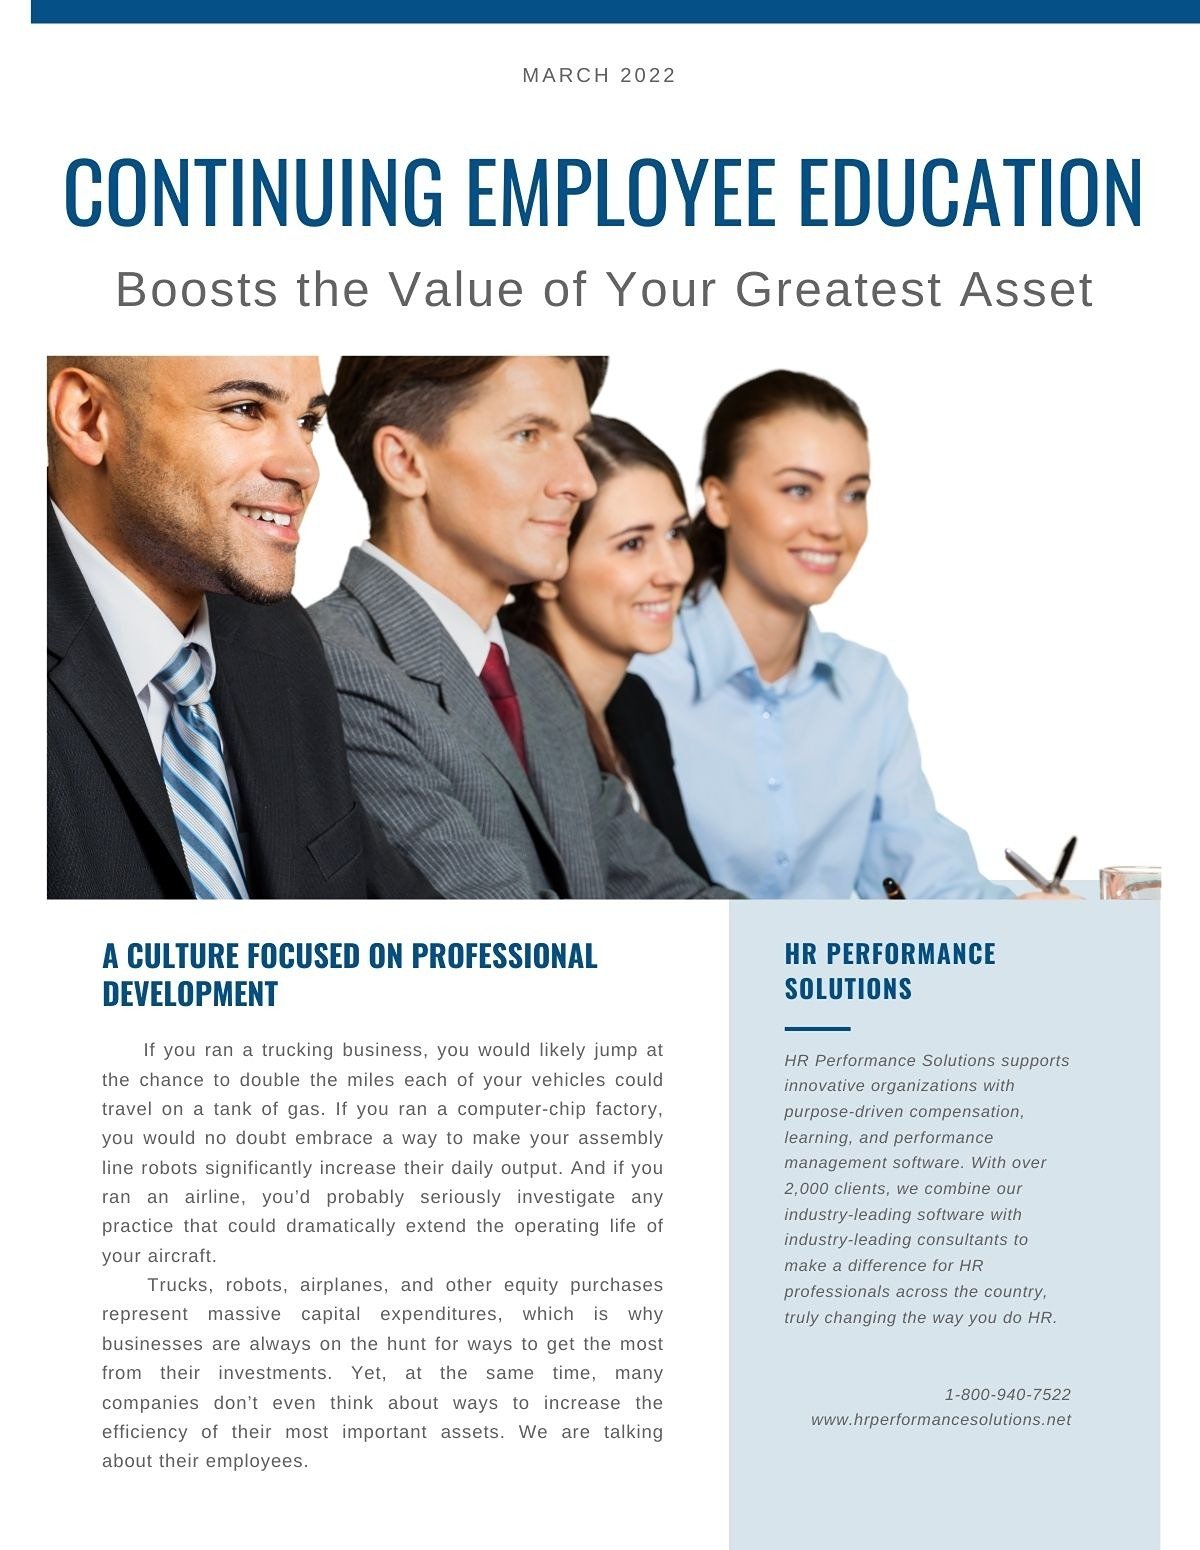 Continuing Employee Education, Boosts the Value of Your Greatest Asset